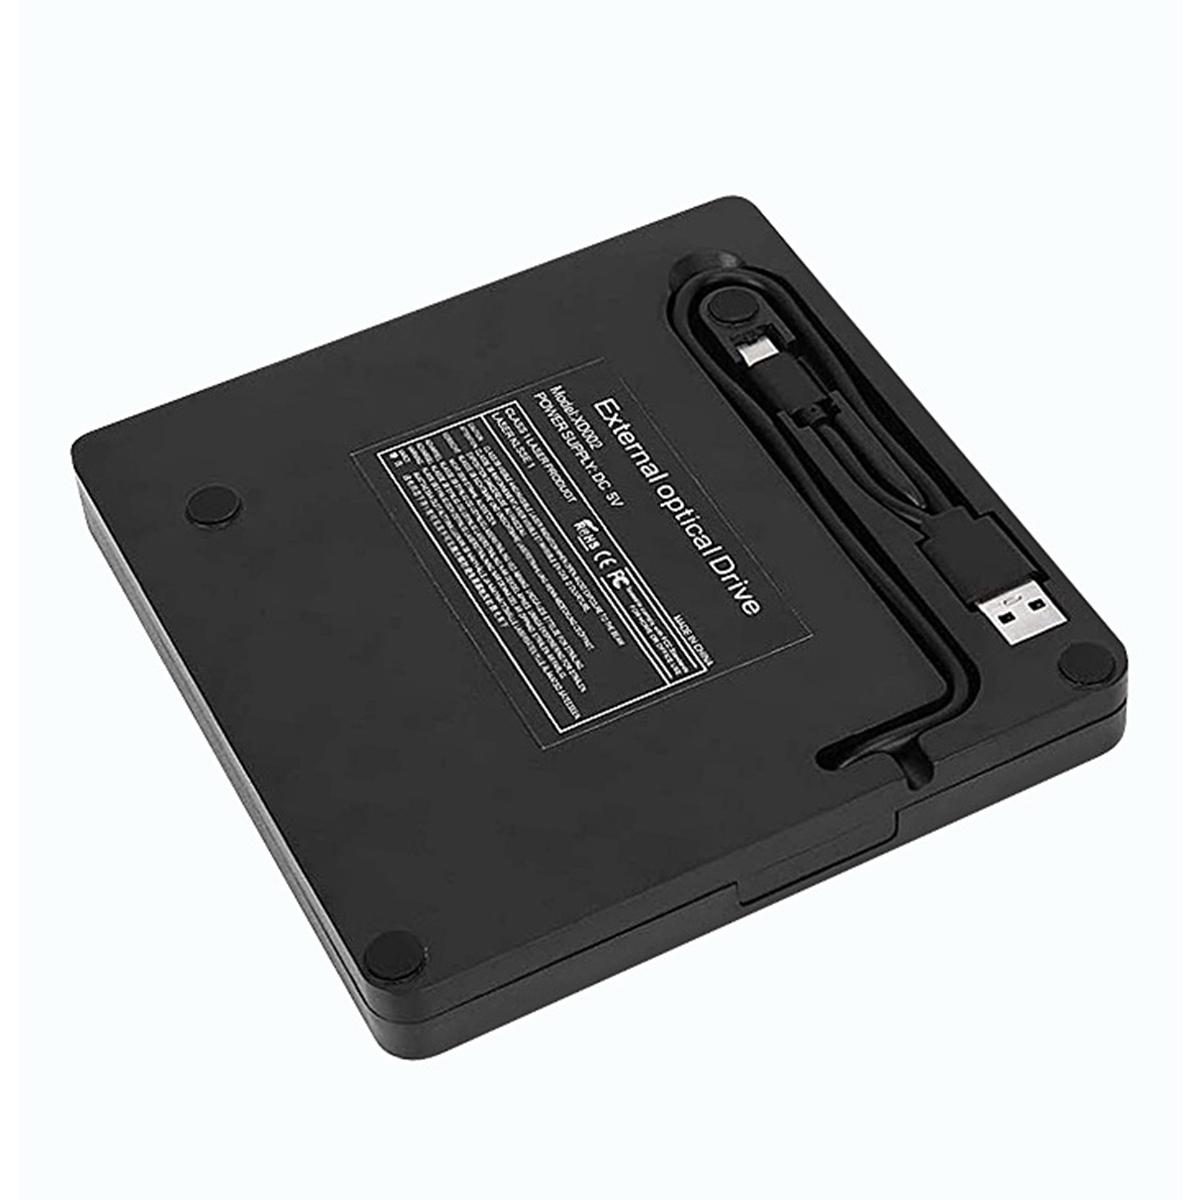 Find USB3 0 Type C CD DVD External Optical Drive DVD RW Player High Speed Data Transfer External Burner Writer Rewriter for Computer PC Laptop XD009 for Sale on Gipsybee.com with cryptocurrencies